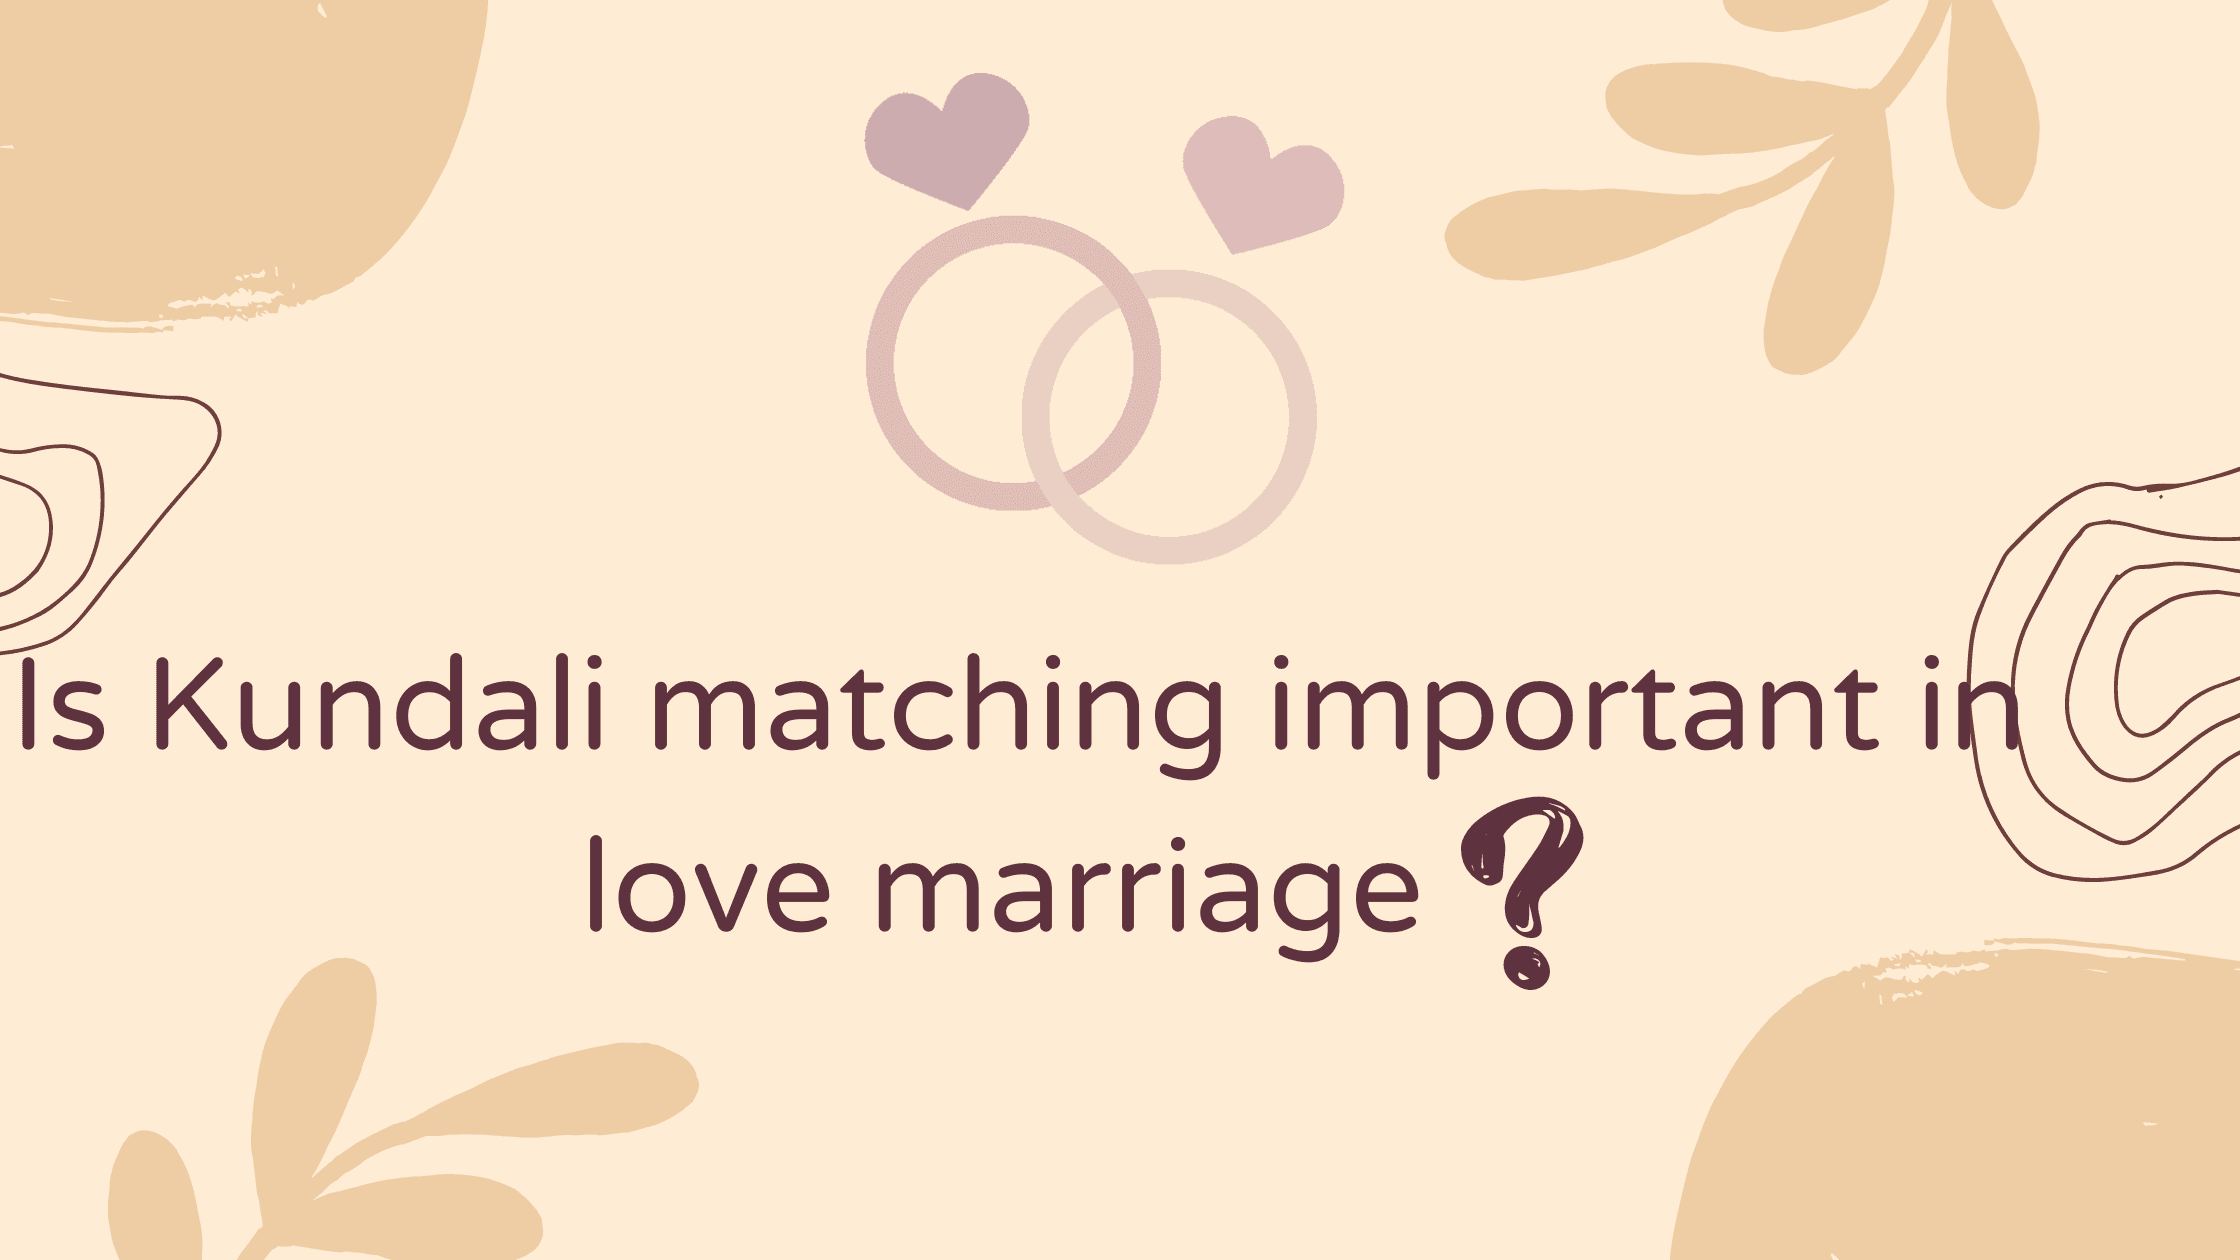 Is Kundali Matching Important in Love Marriage?